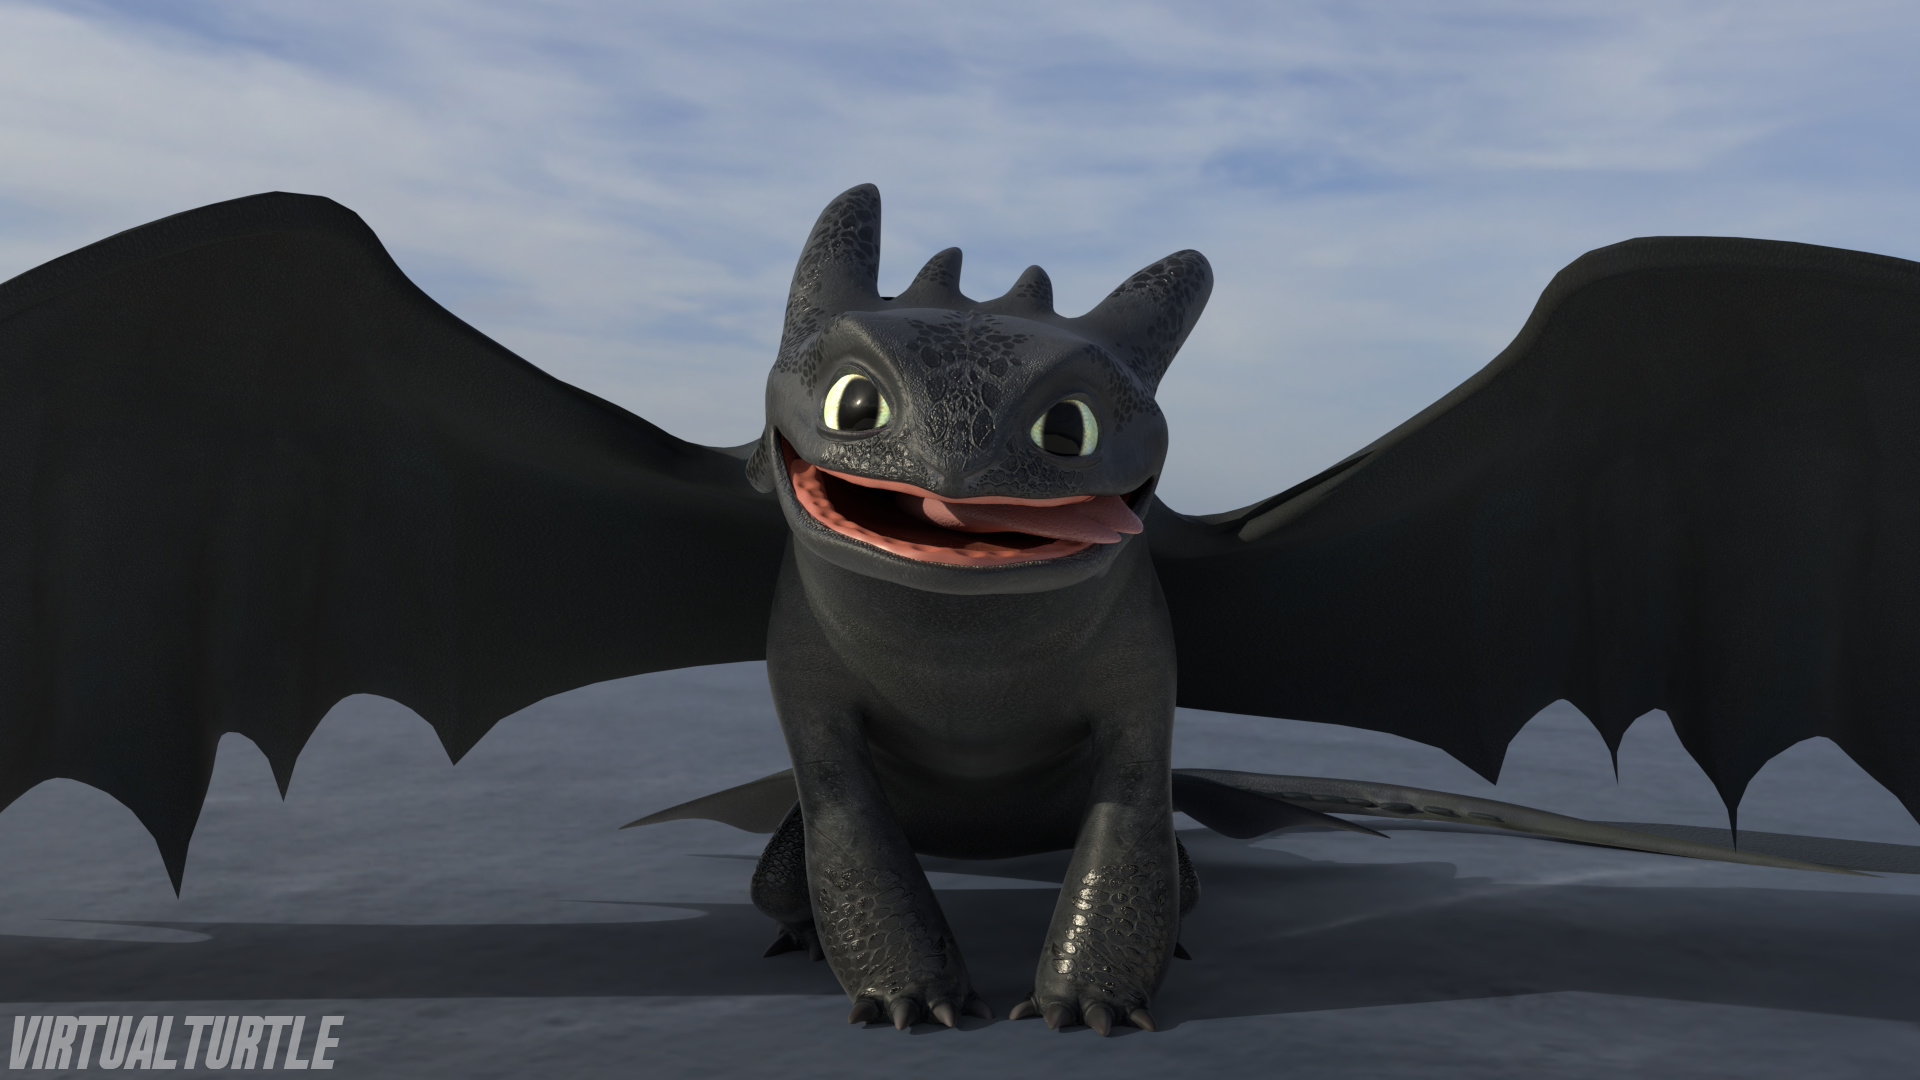 How to train your Dragon - Toothless.